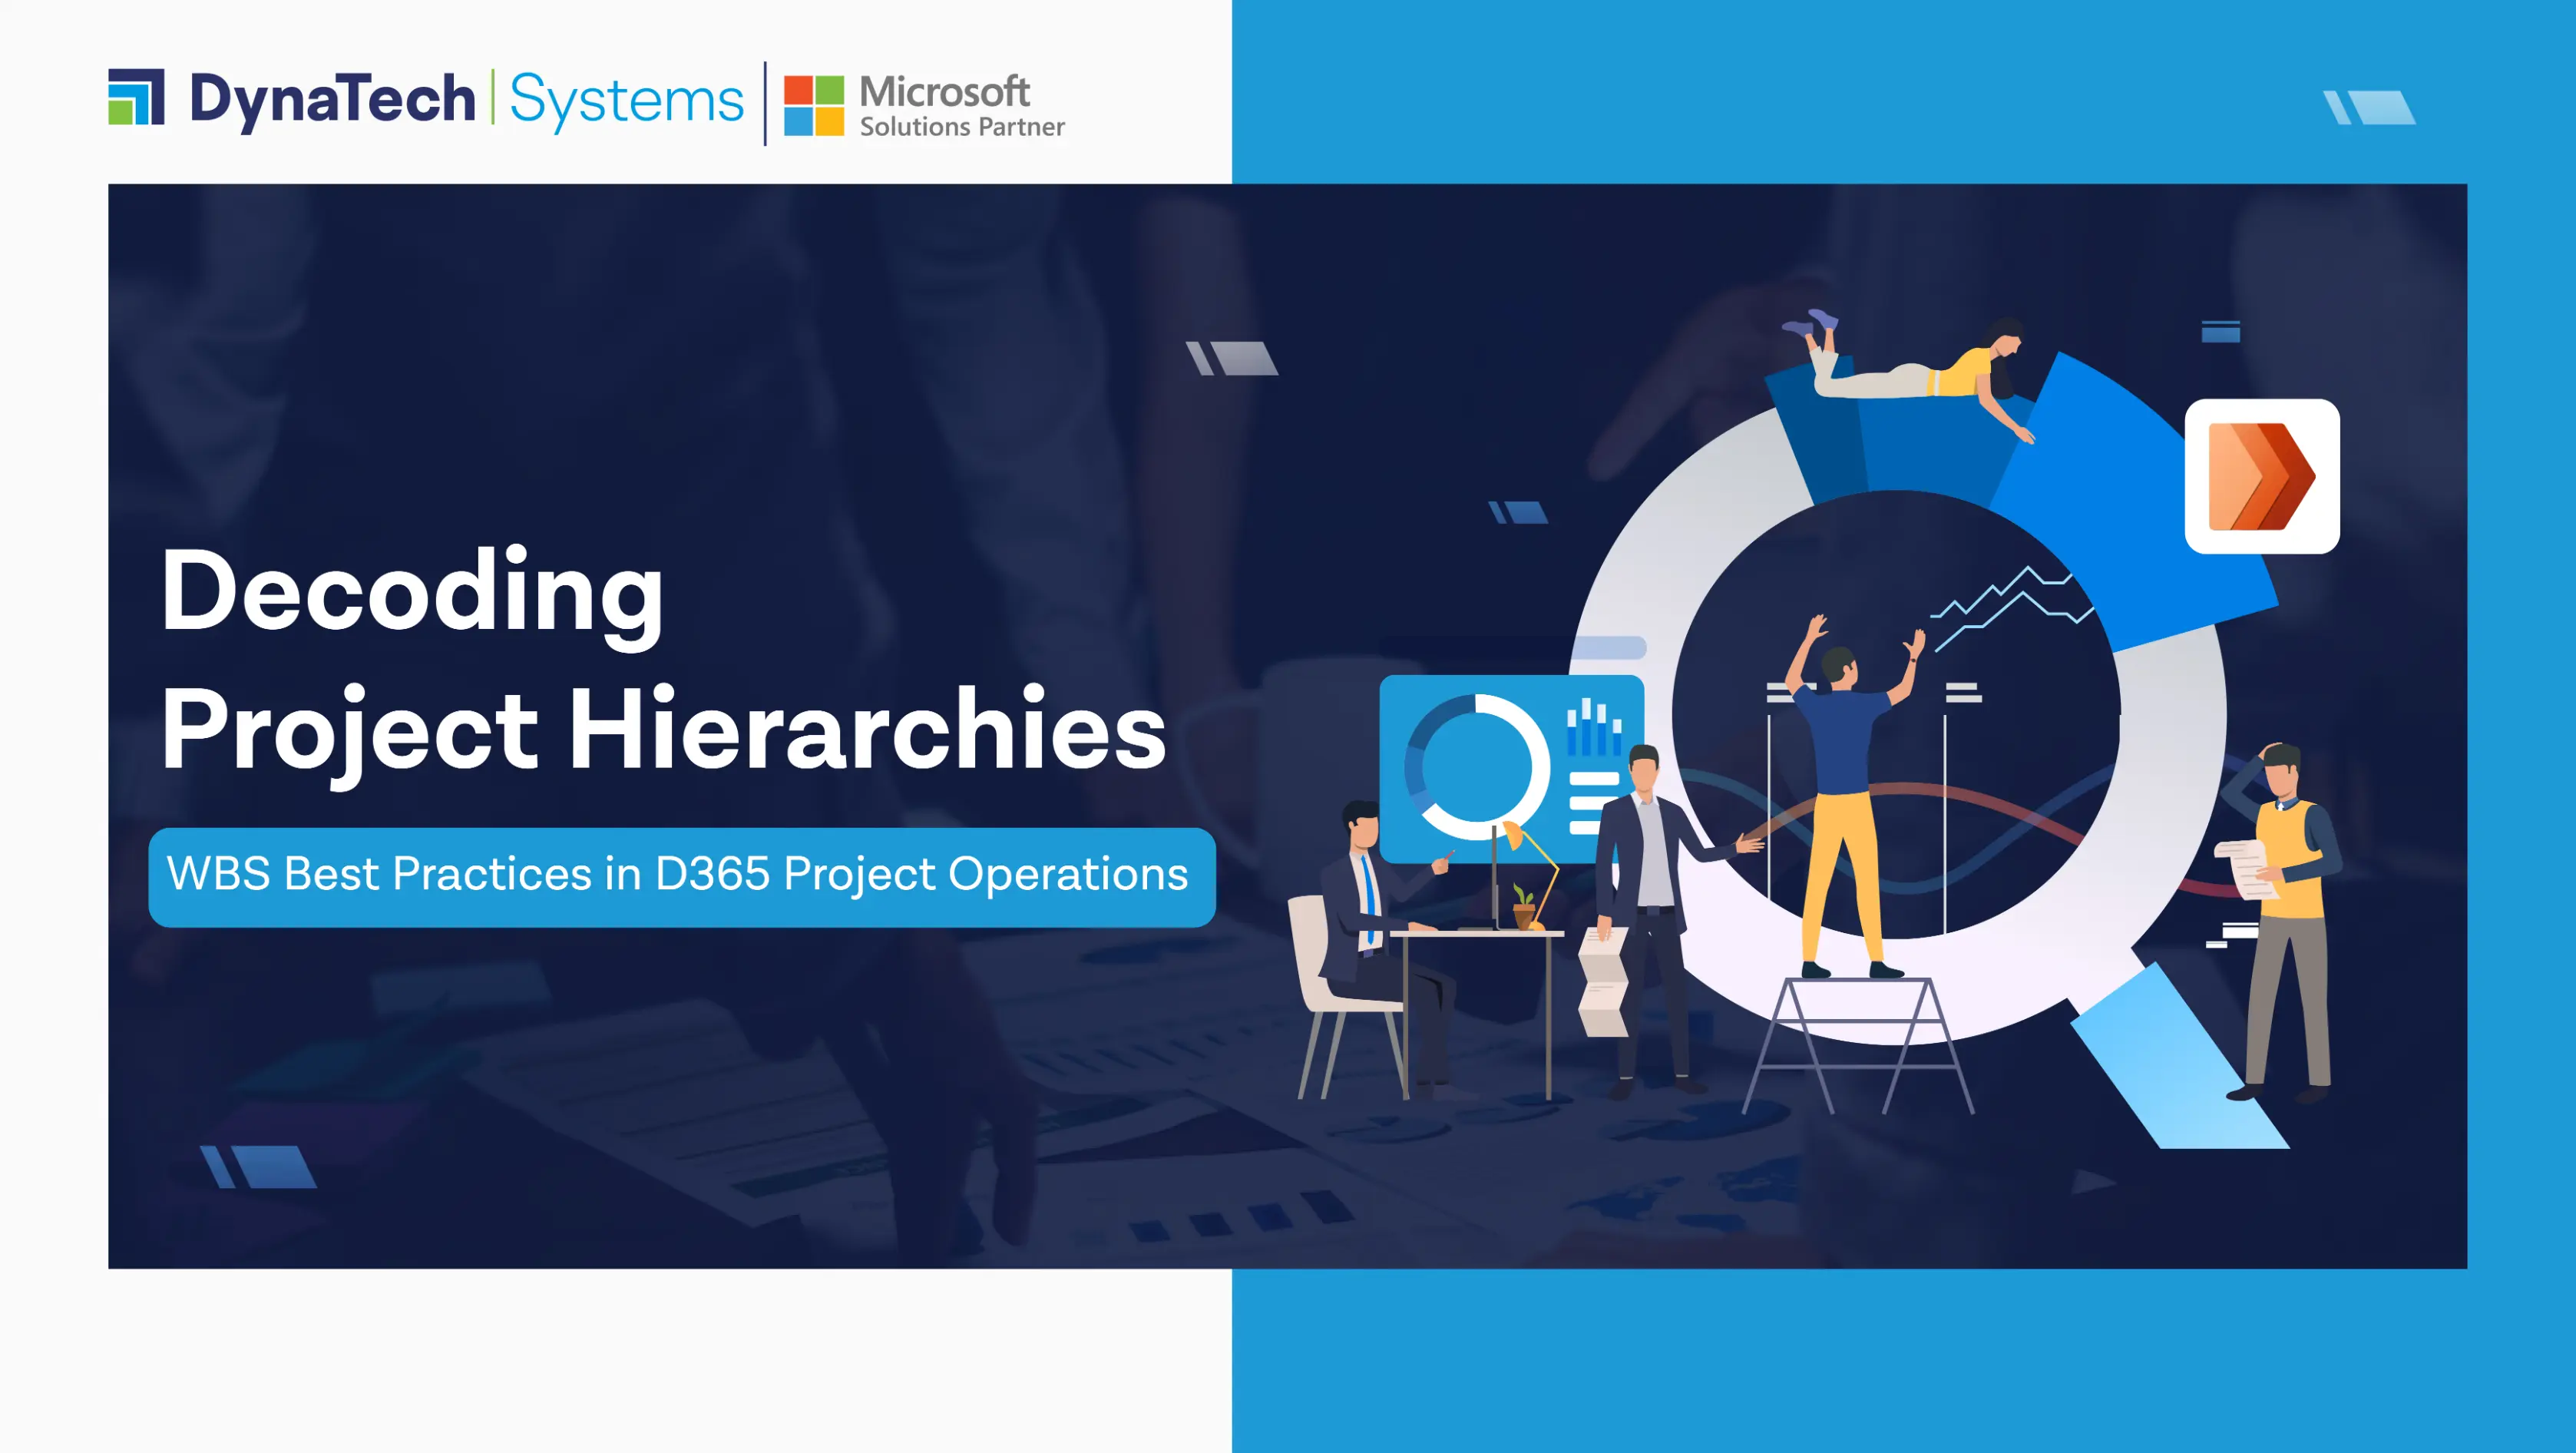 Decoding Project Hierarchies: WBS Best Practices in D365 Project Operations